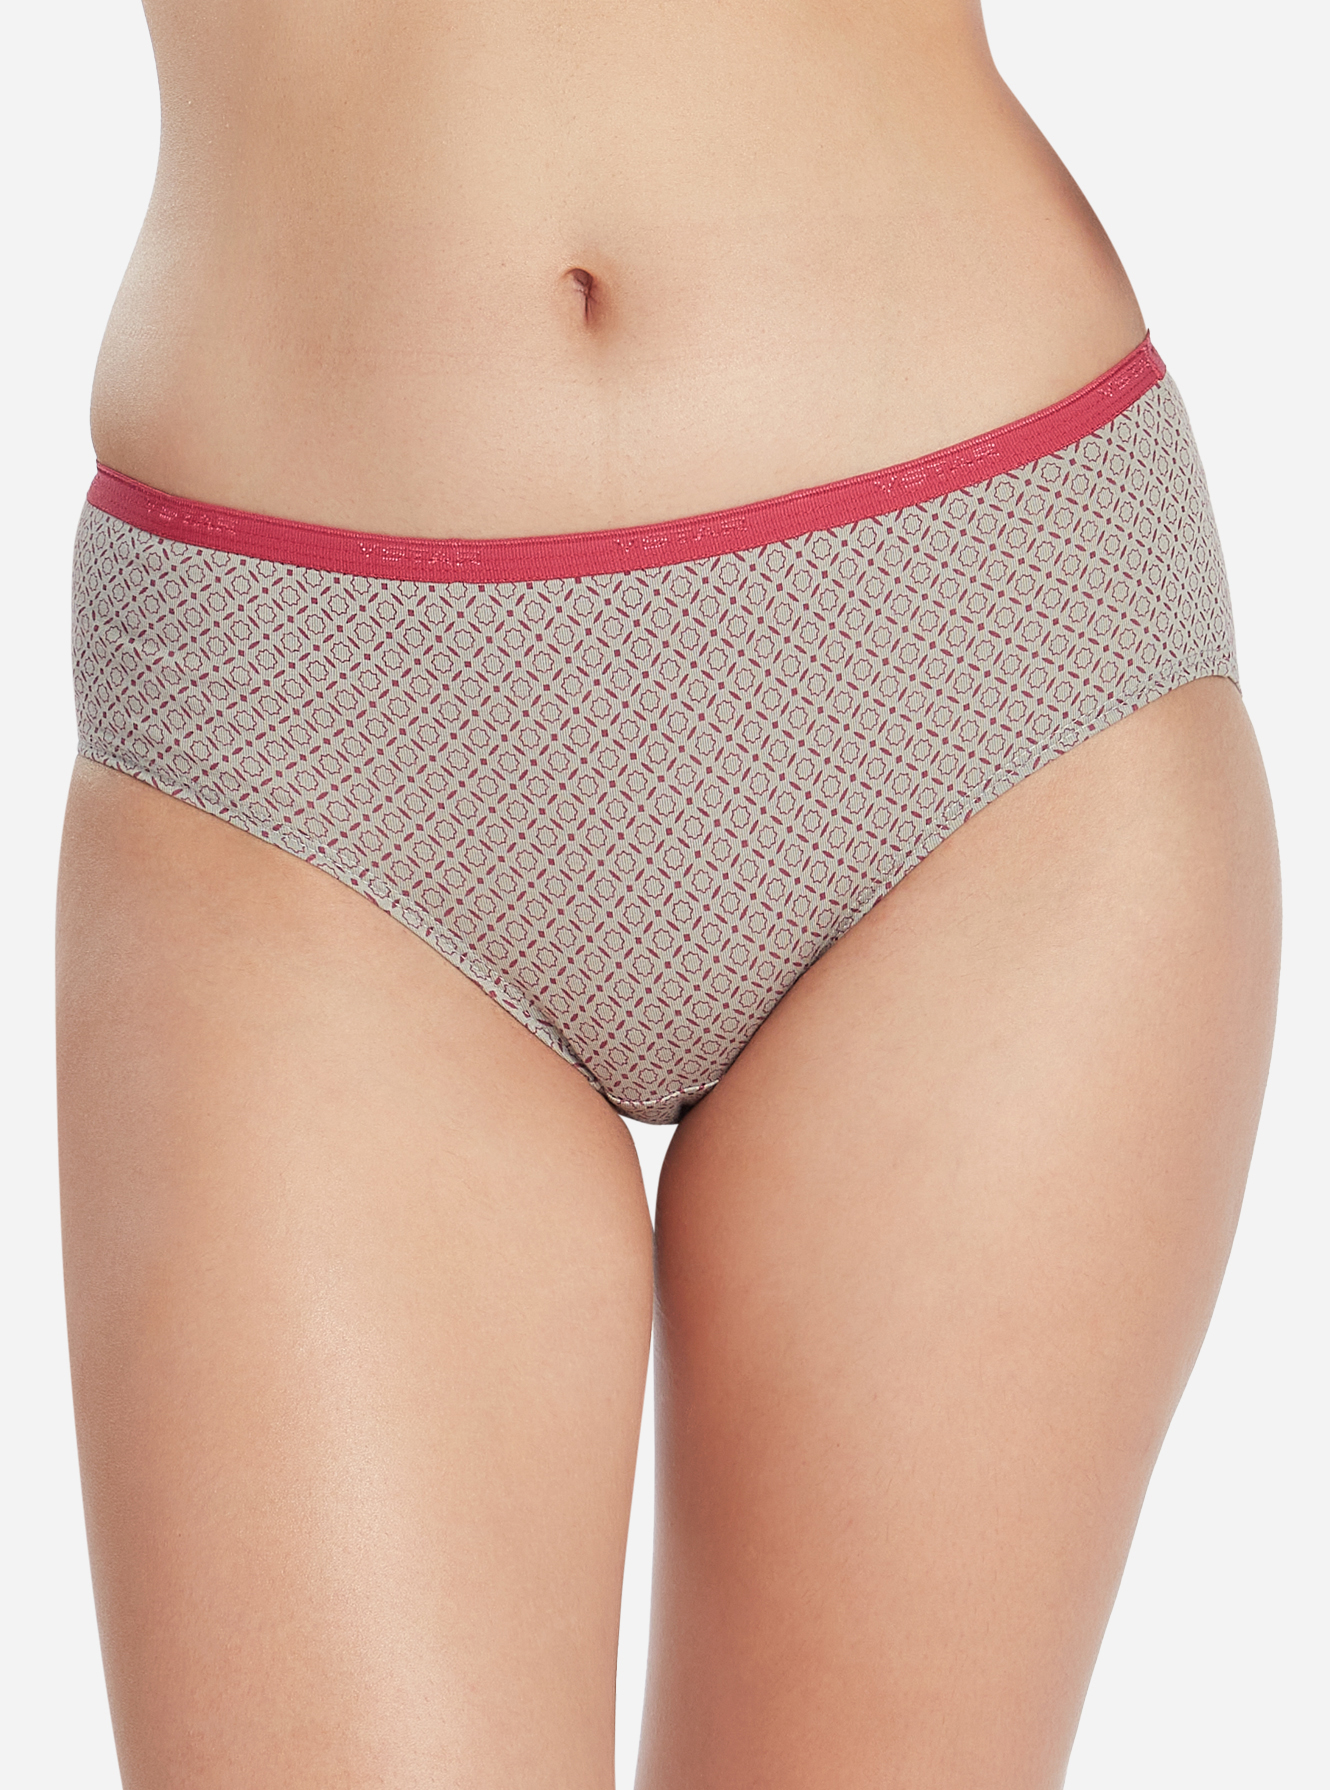 Low rise solid color panty with outer elastic waistband